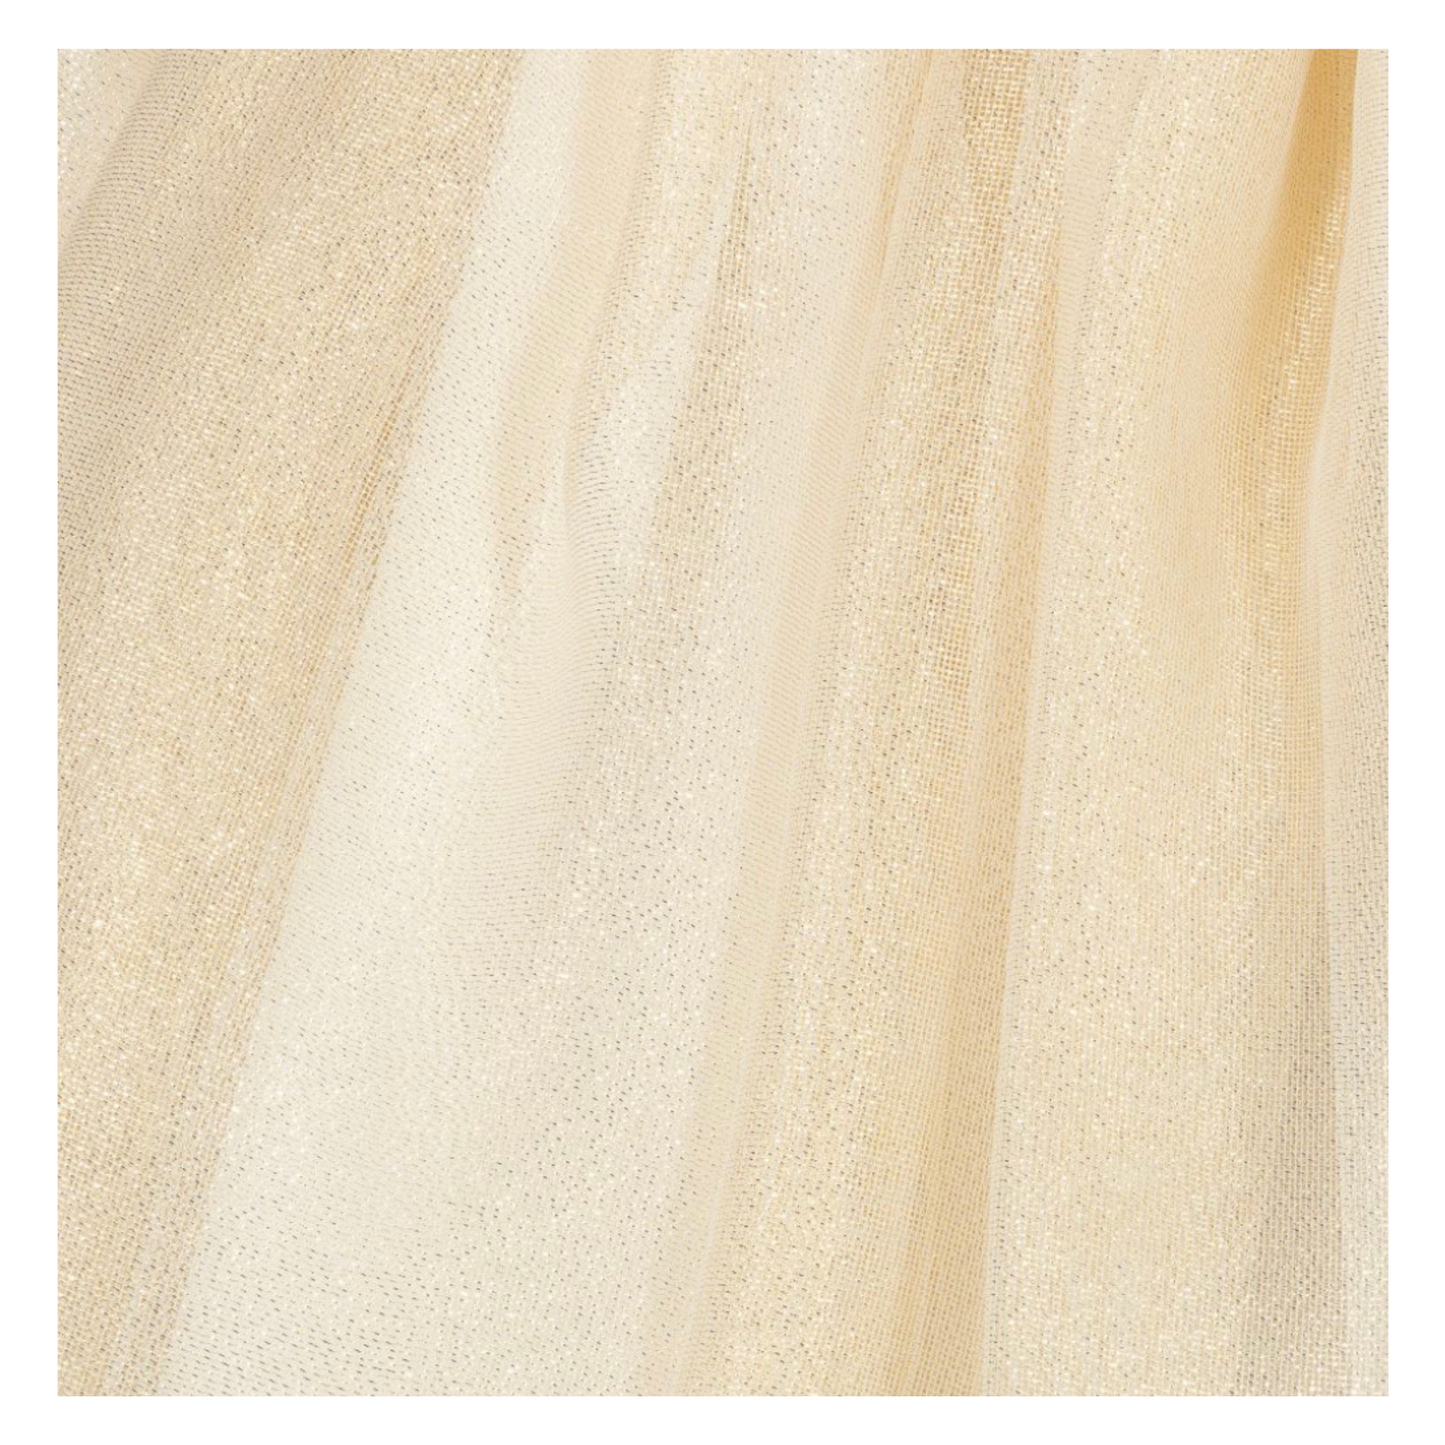 Lesy Sparkly Tulle Diamanté, Pearl and Gold Brocade Skirt Set